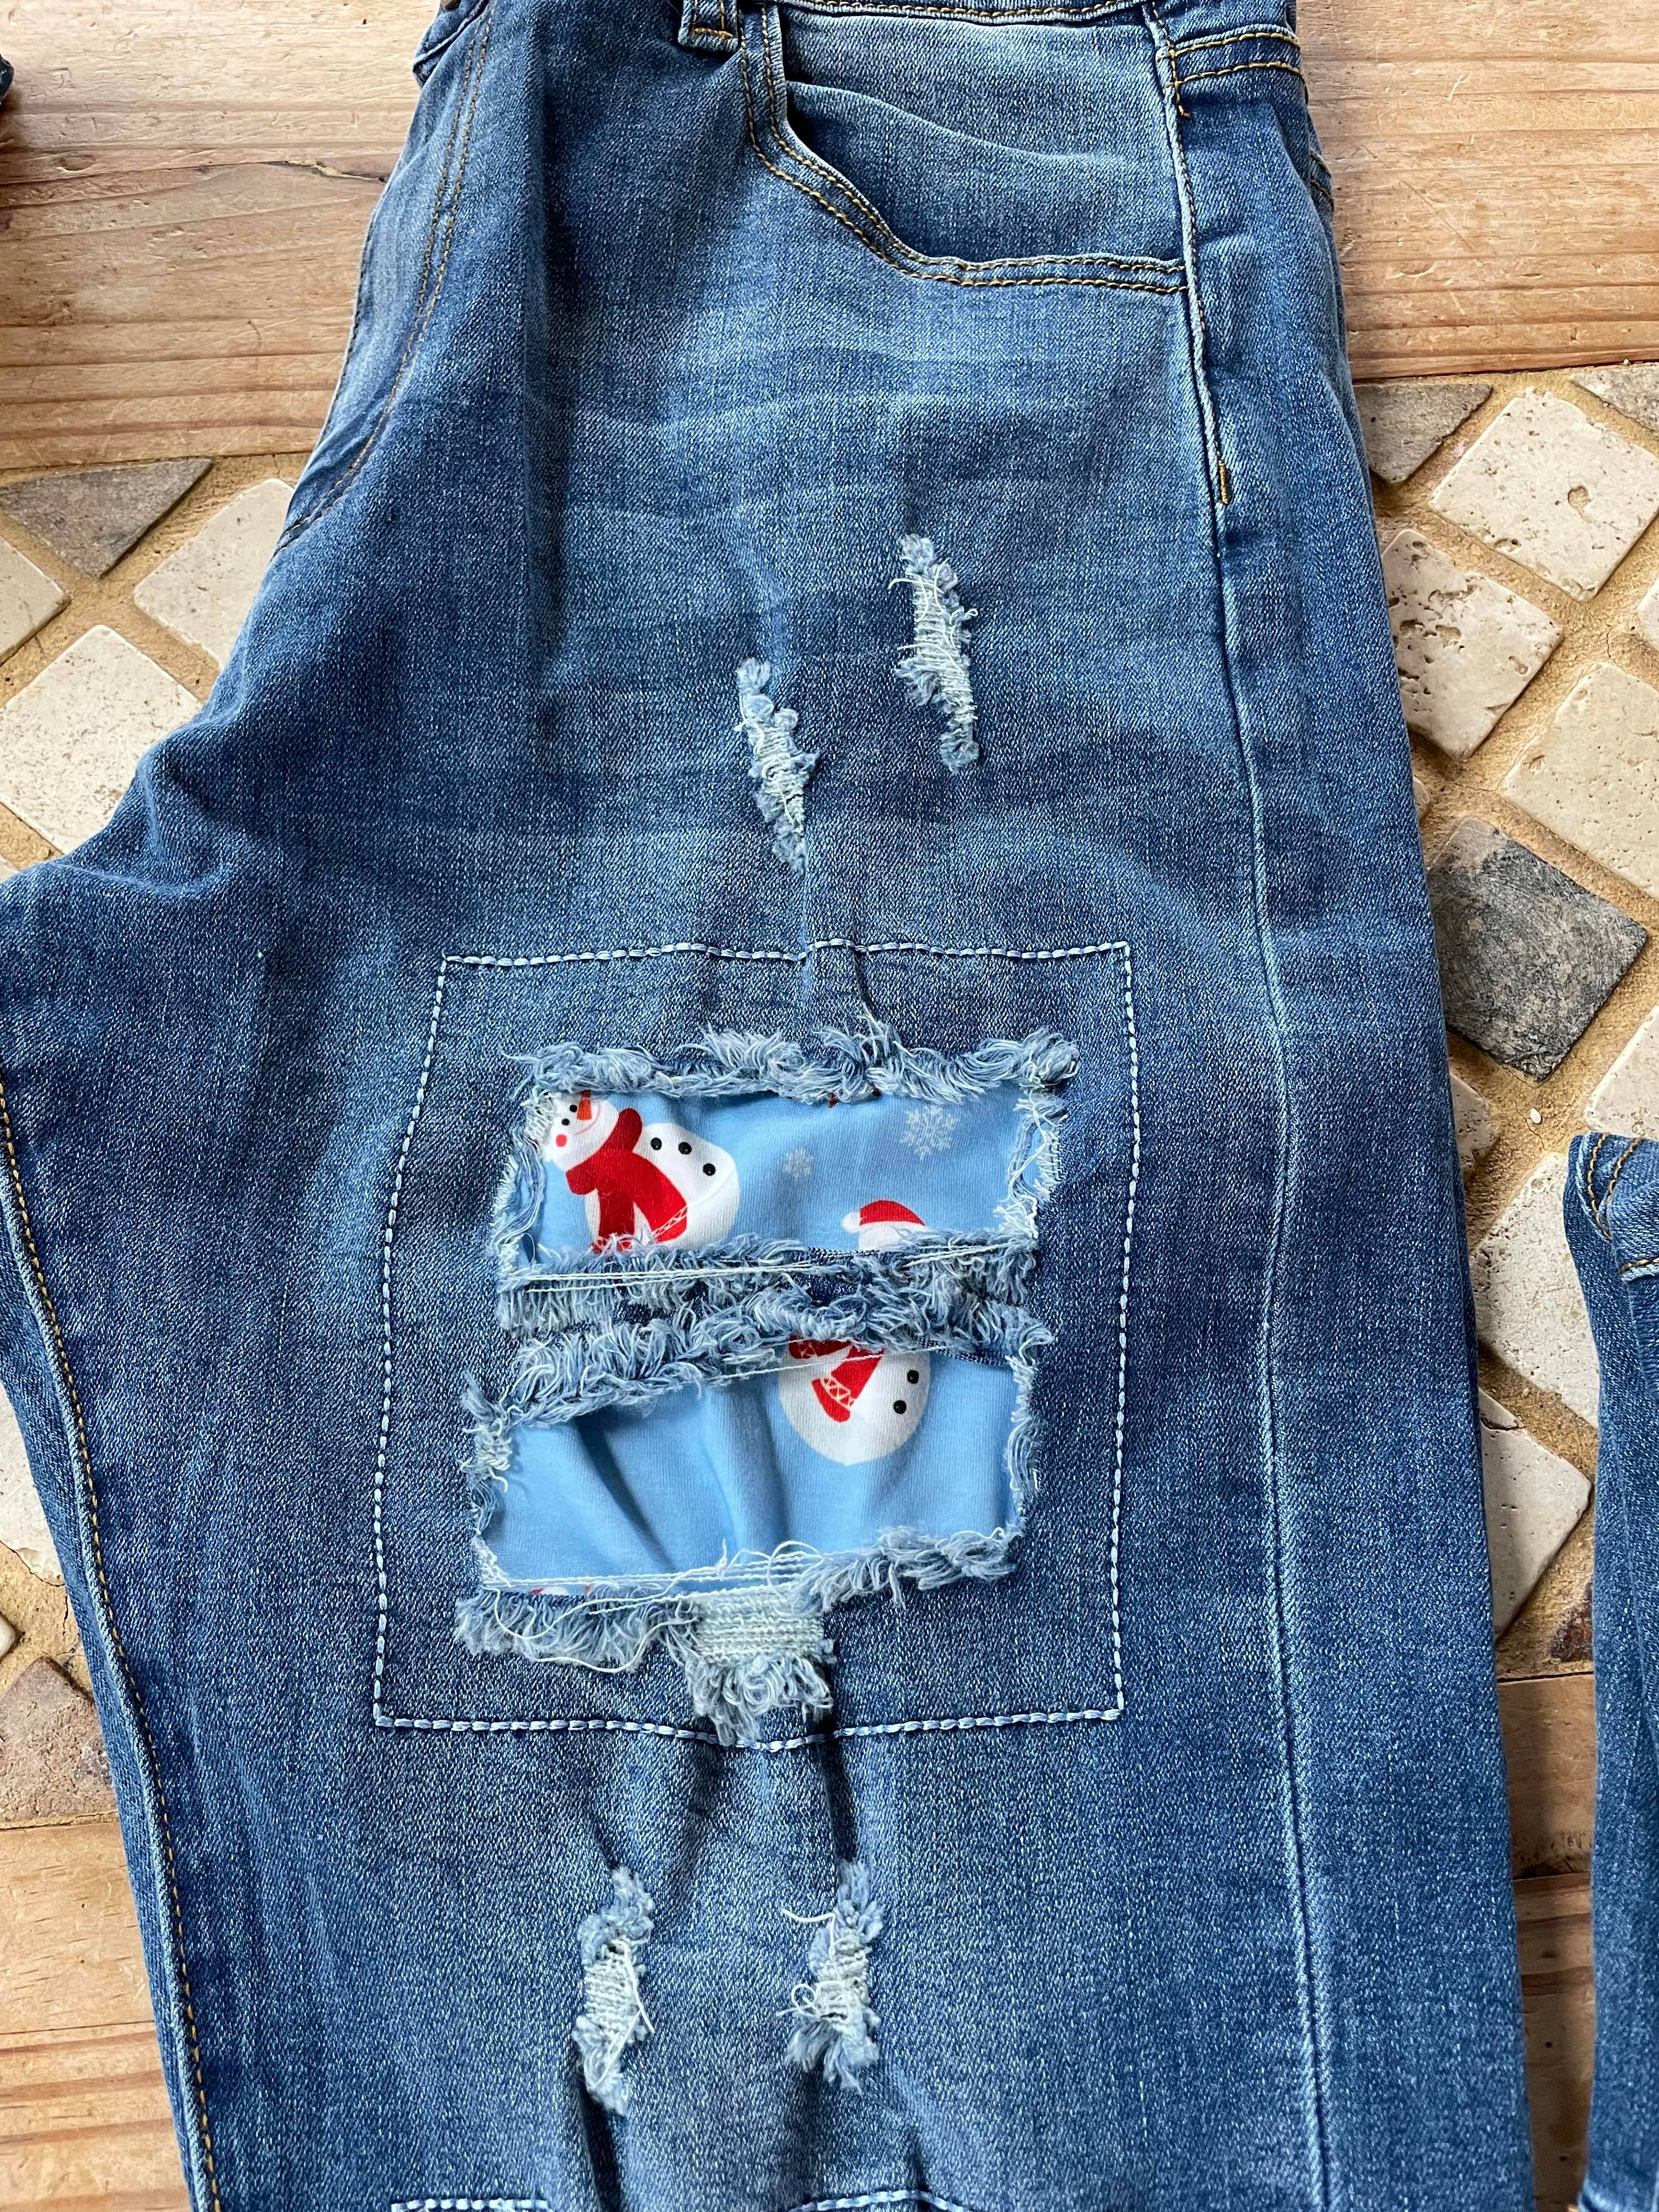 Snowman Jeans Christmas Patch work Jeans Different styles